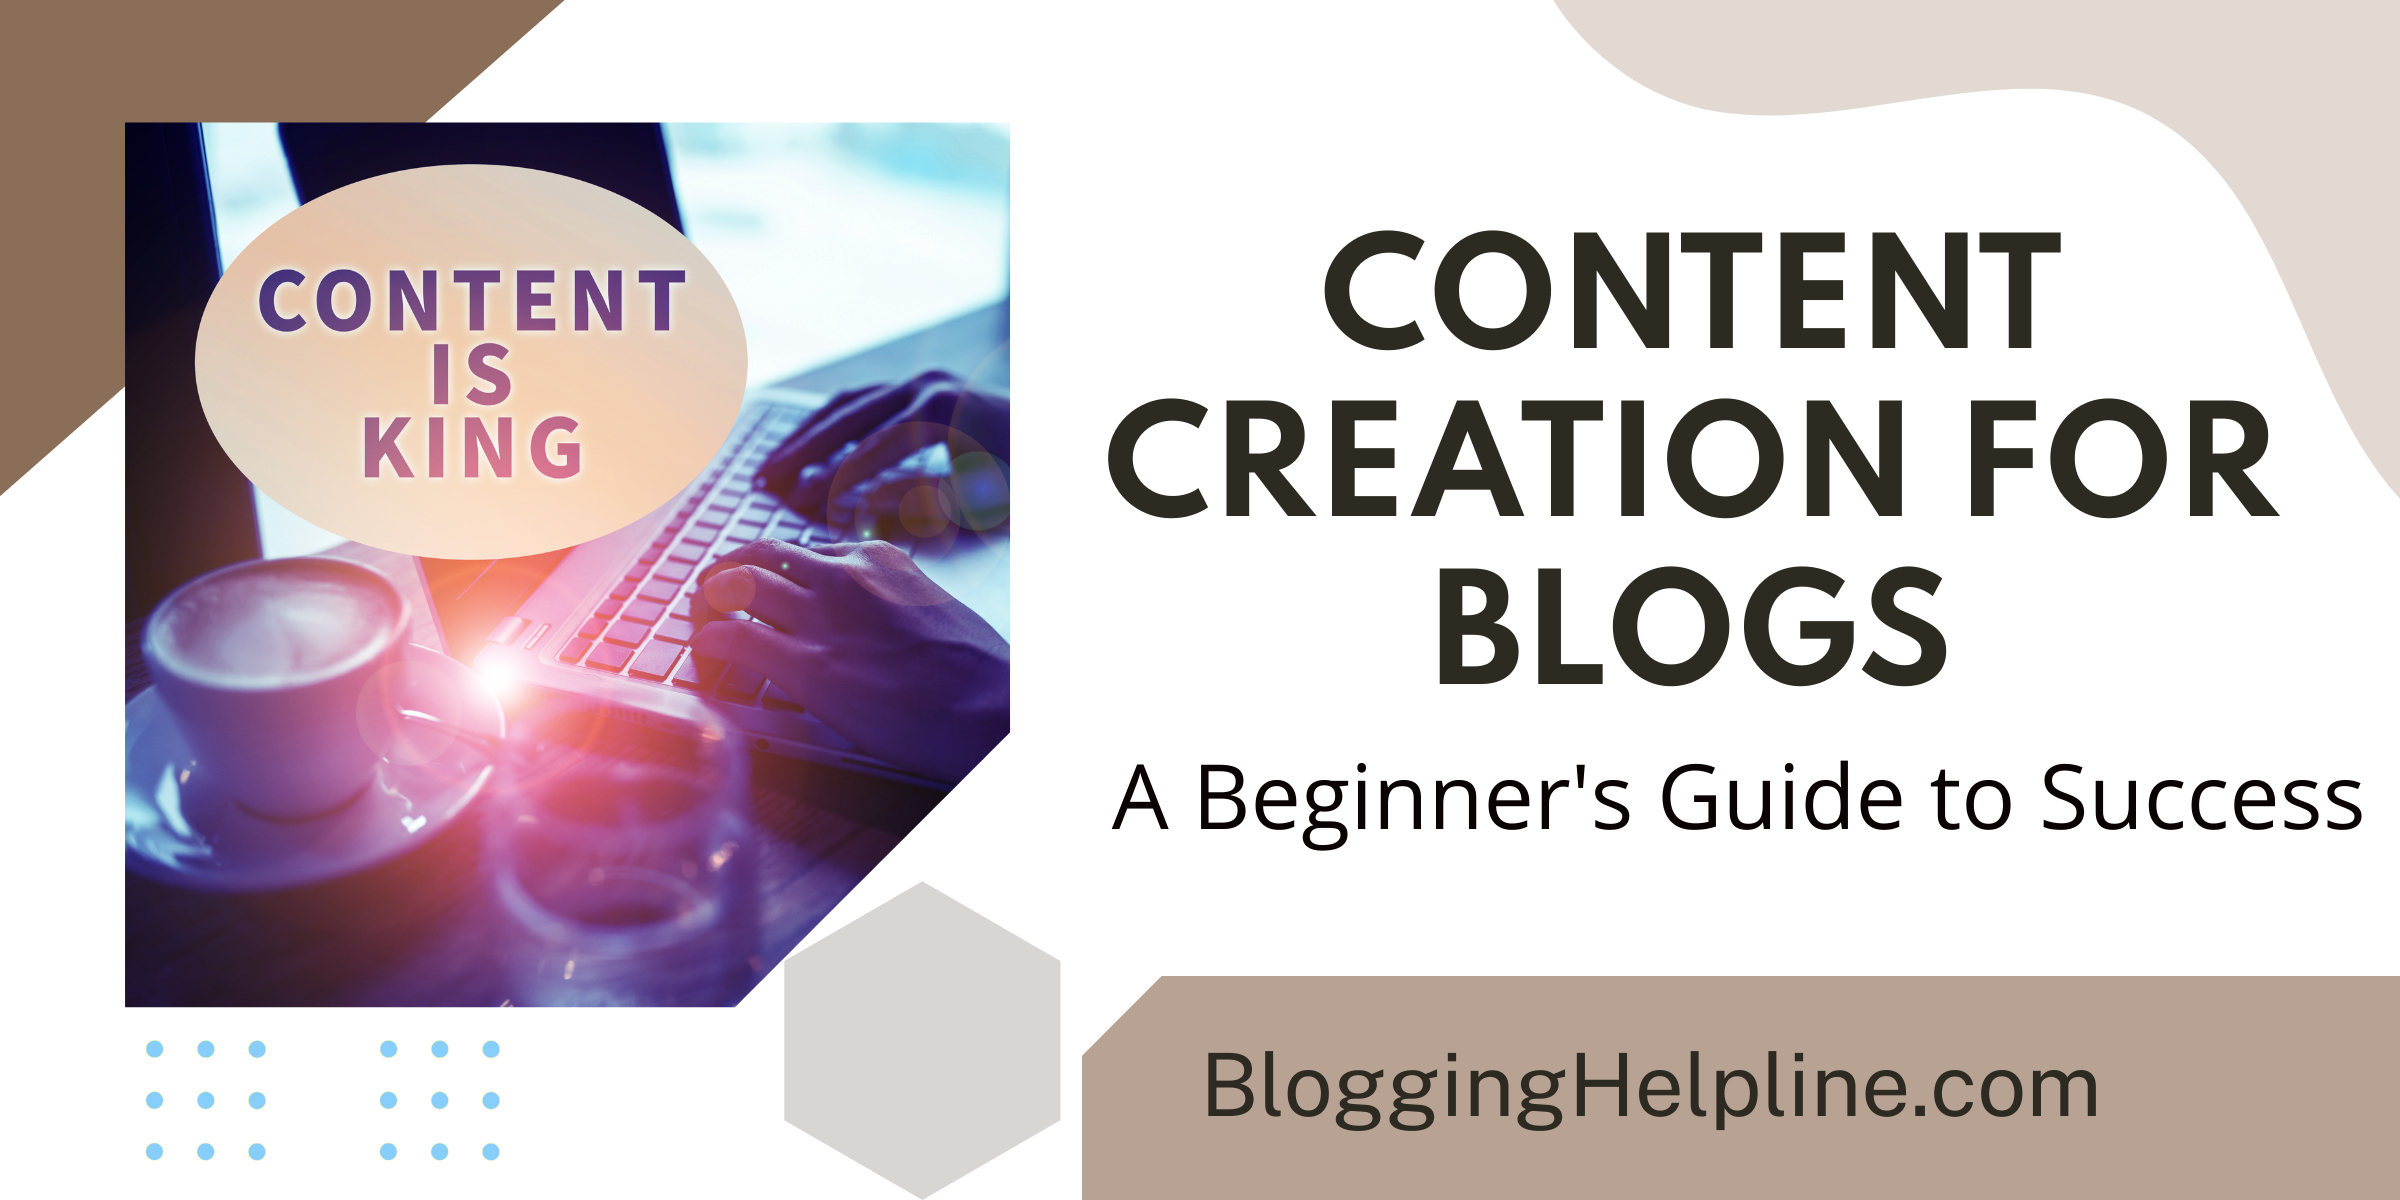 CONTENT CREATION FOR BLOGS